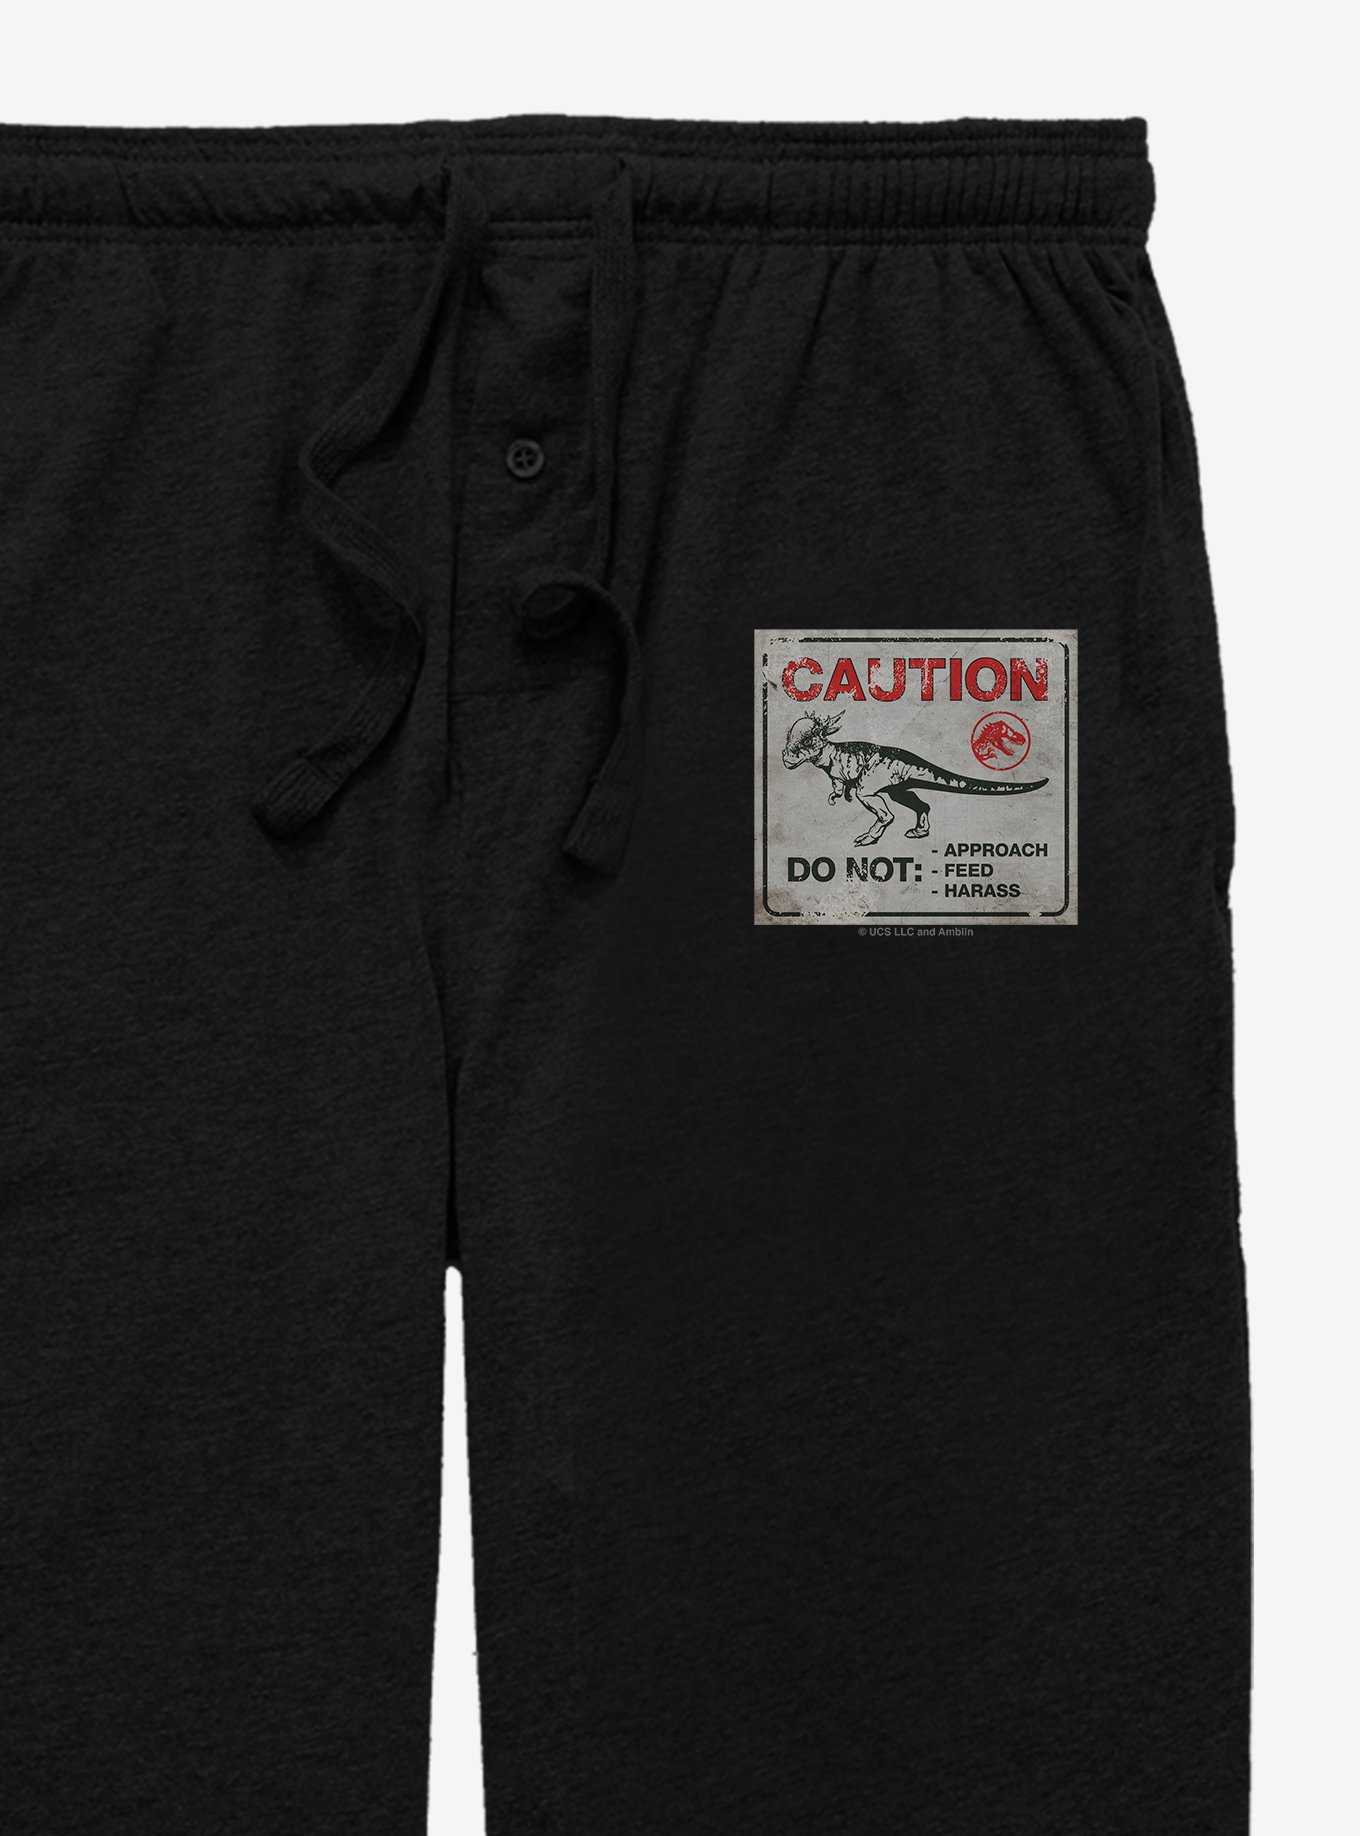 Jurassic World Do Not Approach Sign Pajama Pants, , hi-res